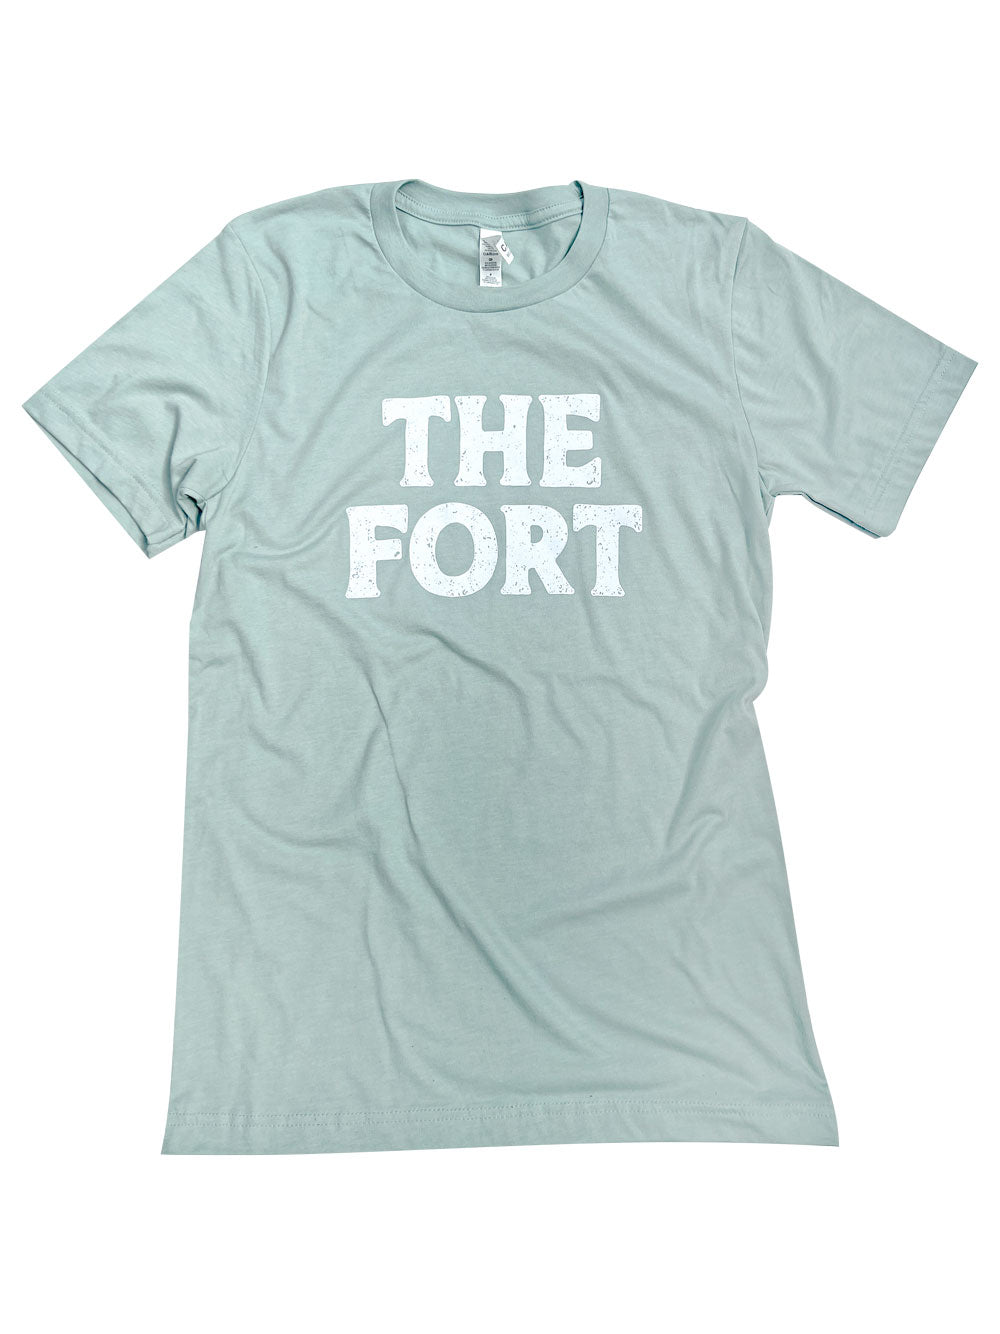 The Fort dusty blue heather t-shirt